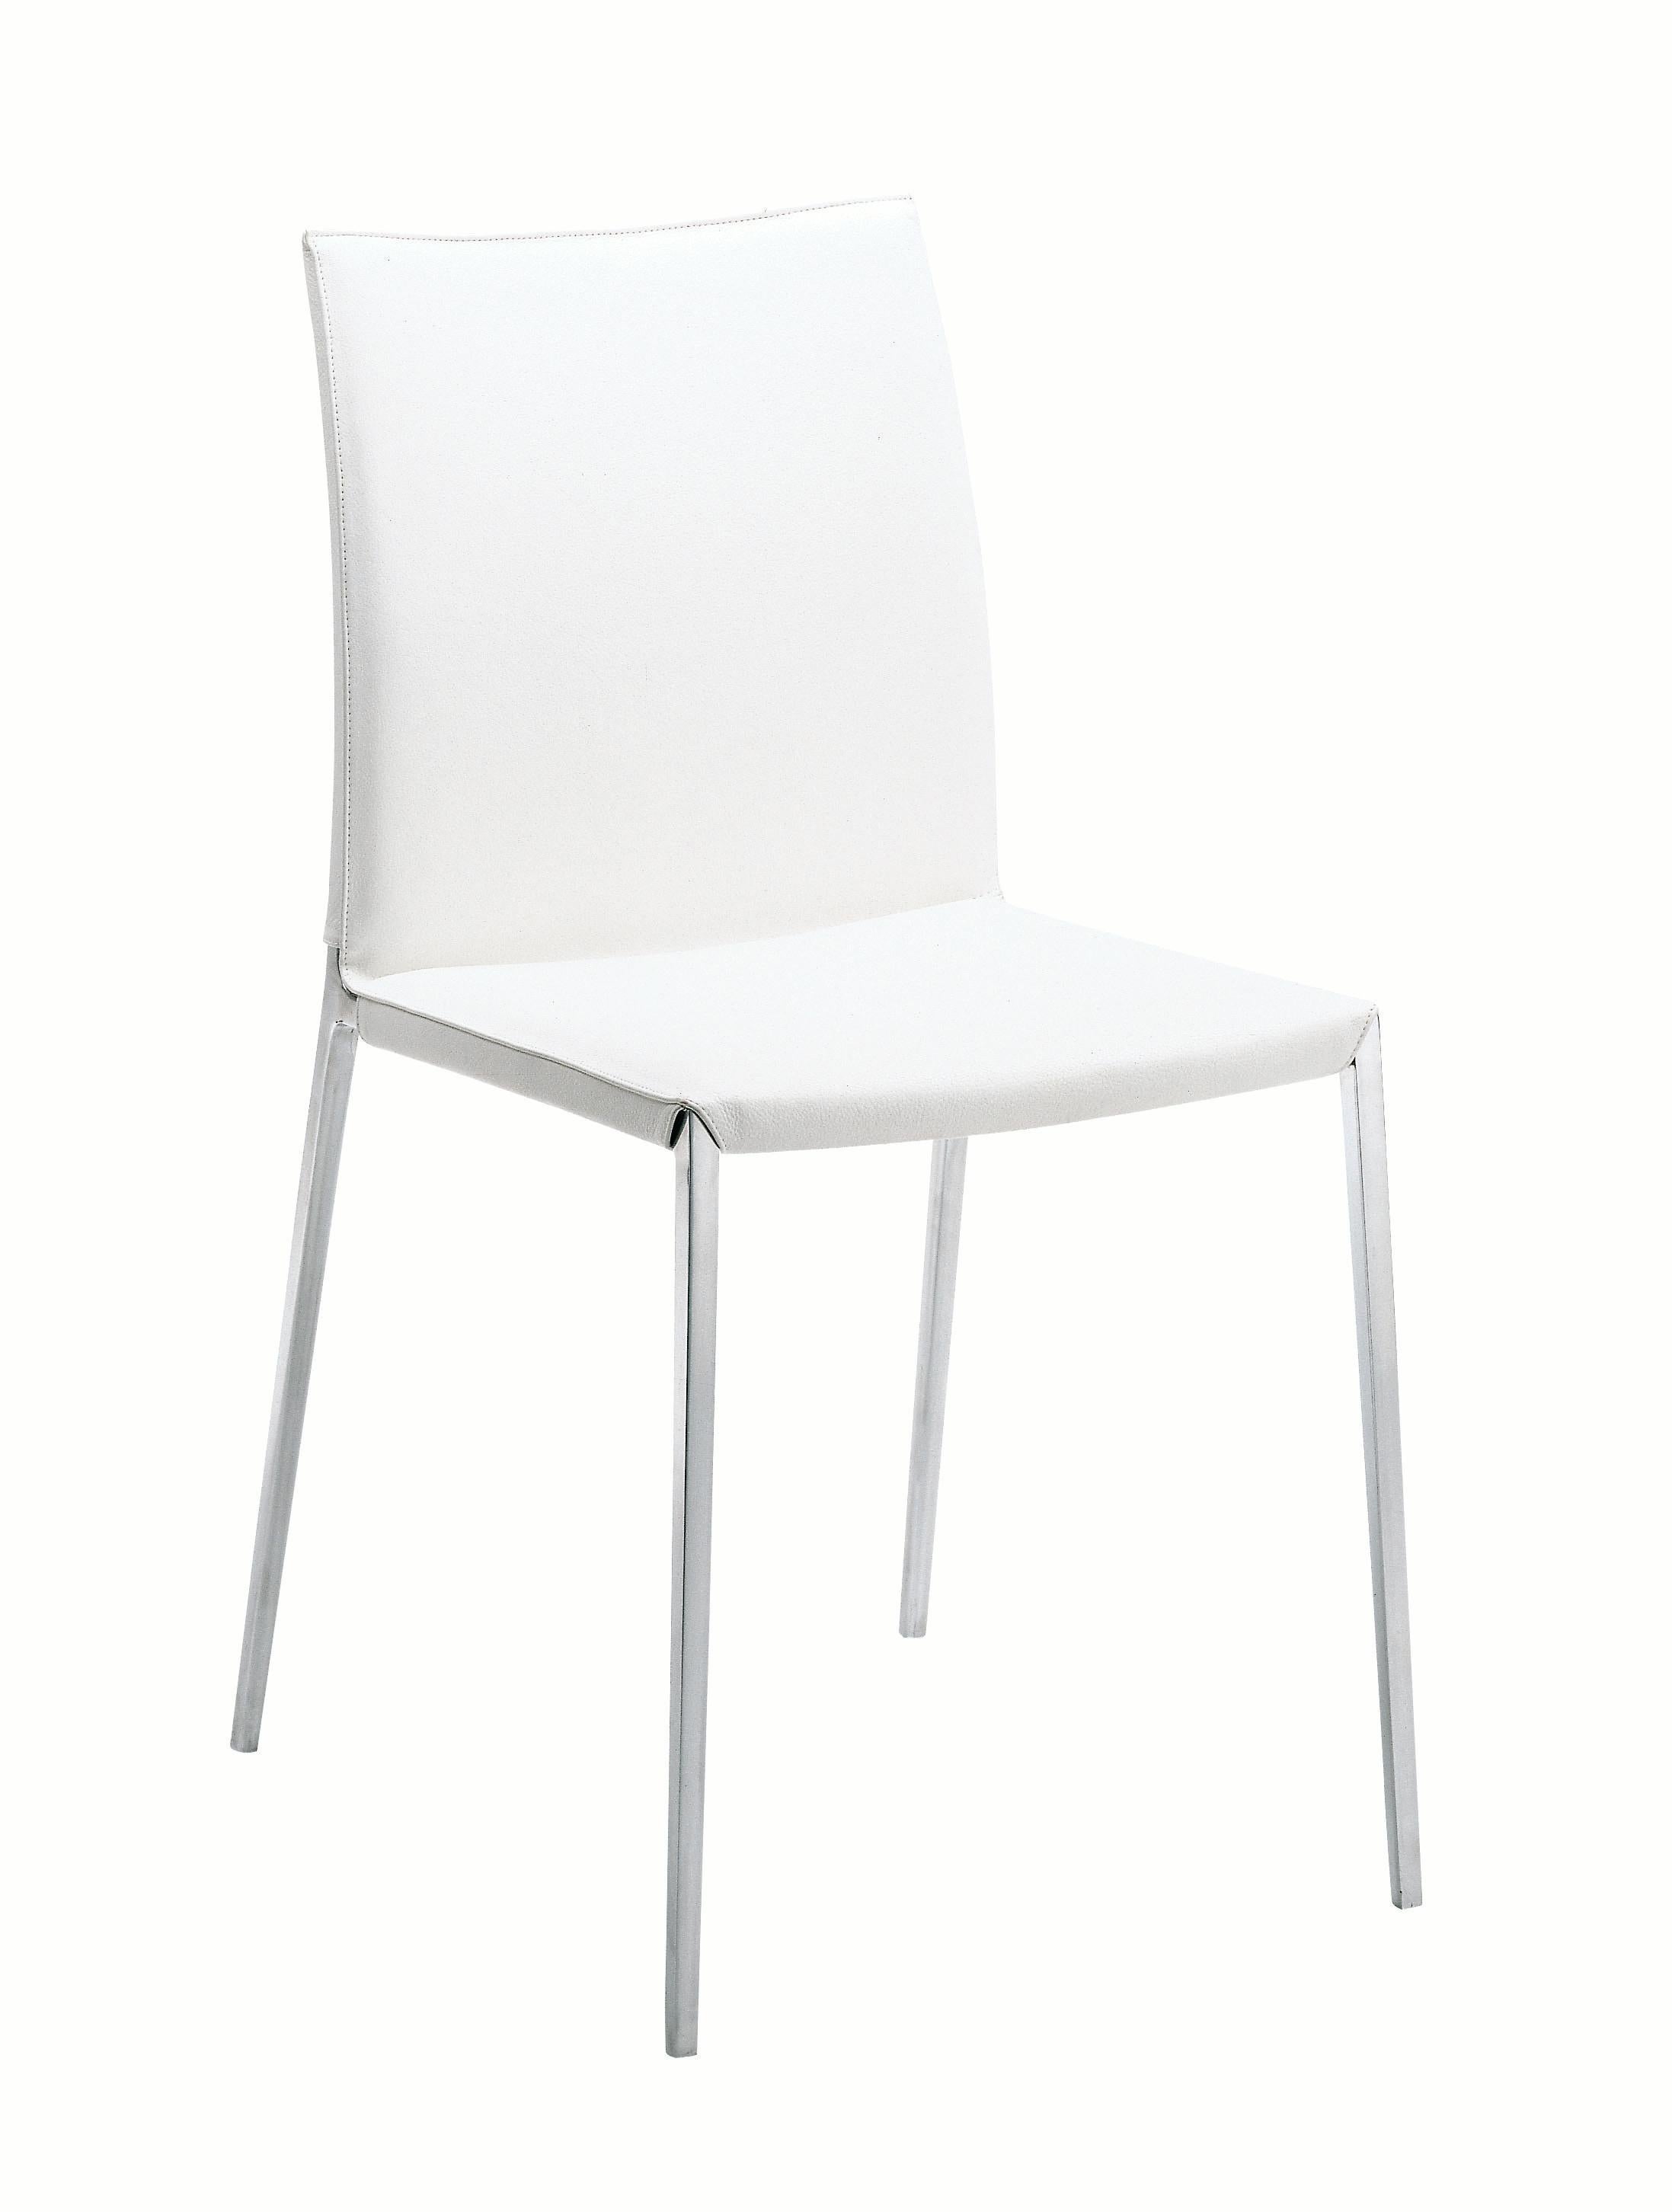 Zanotta Lia Chair in White Upholstery with Polished Aluminum Frame by Roberto Barbieri

Aluminum alloy frame, polished or painted black, graphite or white. Seat and back upholstered in polyurethane. Fixed internal nylon cover. Removable external